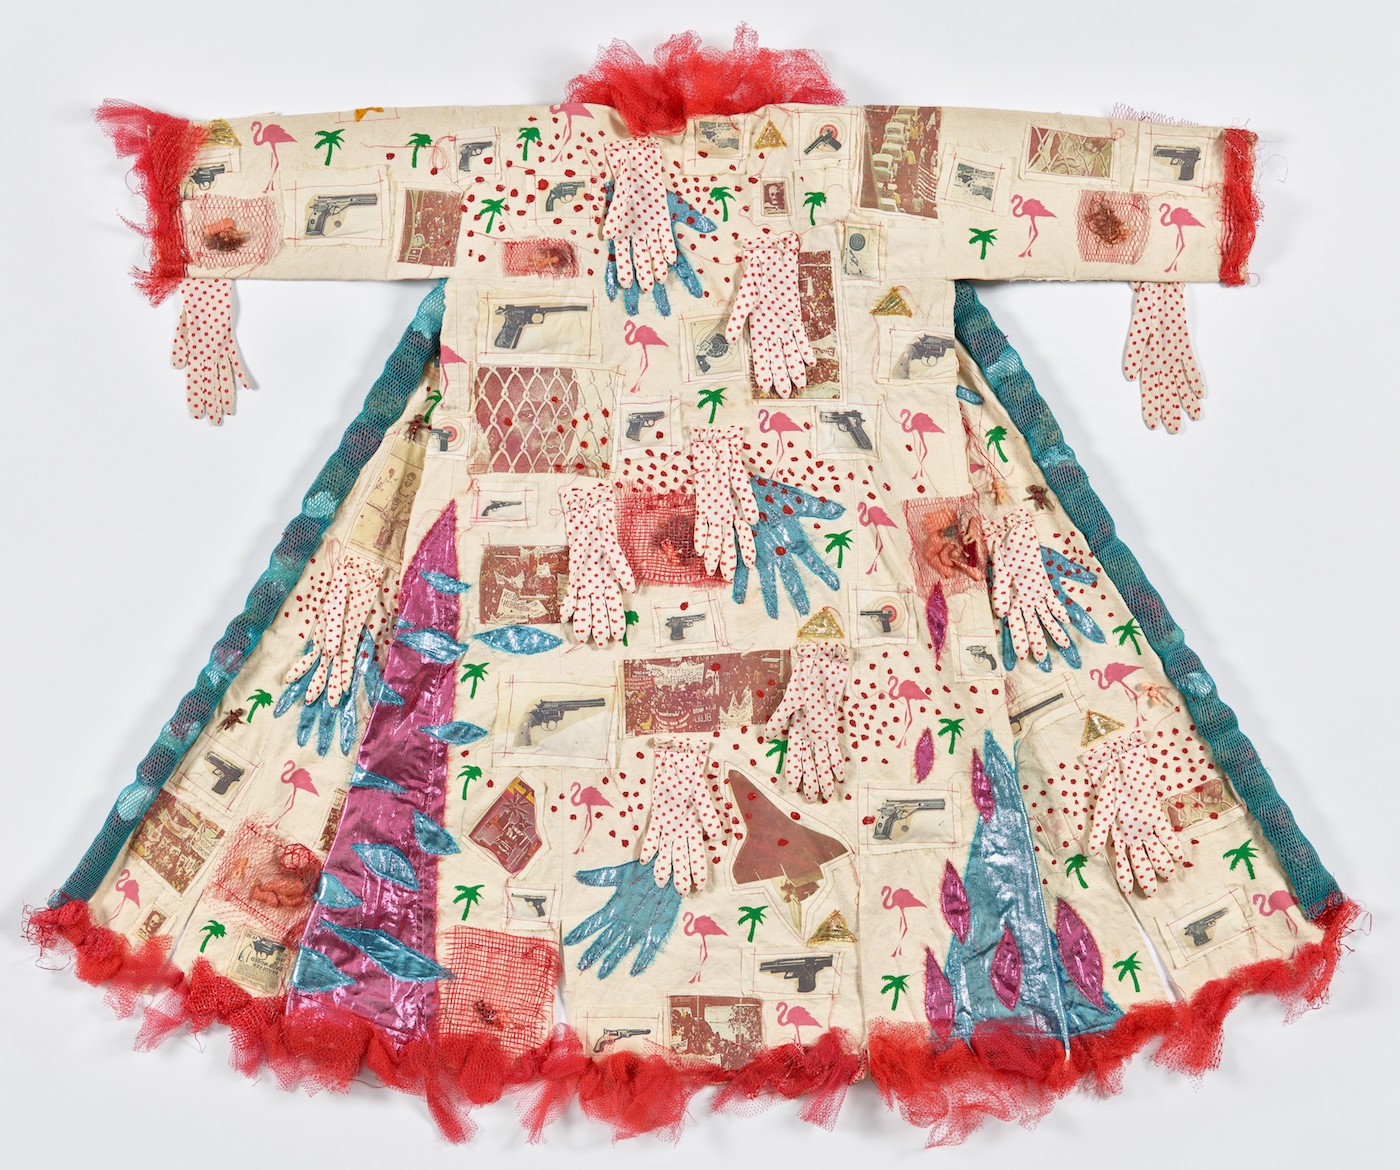 Dina Knapp, “See It Like a Native: History Kimono #1” (1982), painted, appliquéd, and Xerox-transferred cotton, polyester, plastic, and paper (courtesy Philadelphia Museum of Art, promised gift of Julie Schafler Dale Collection)